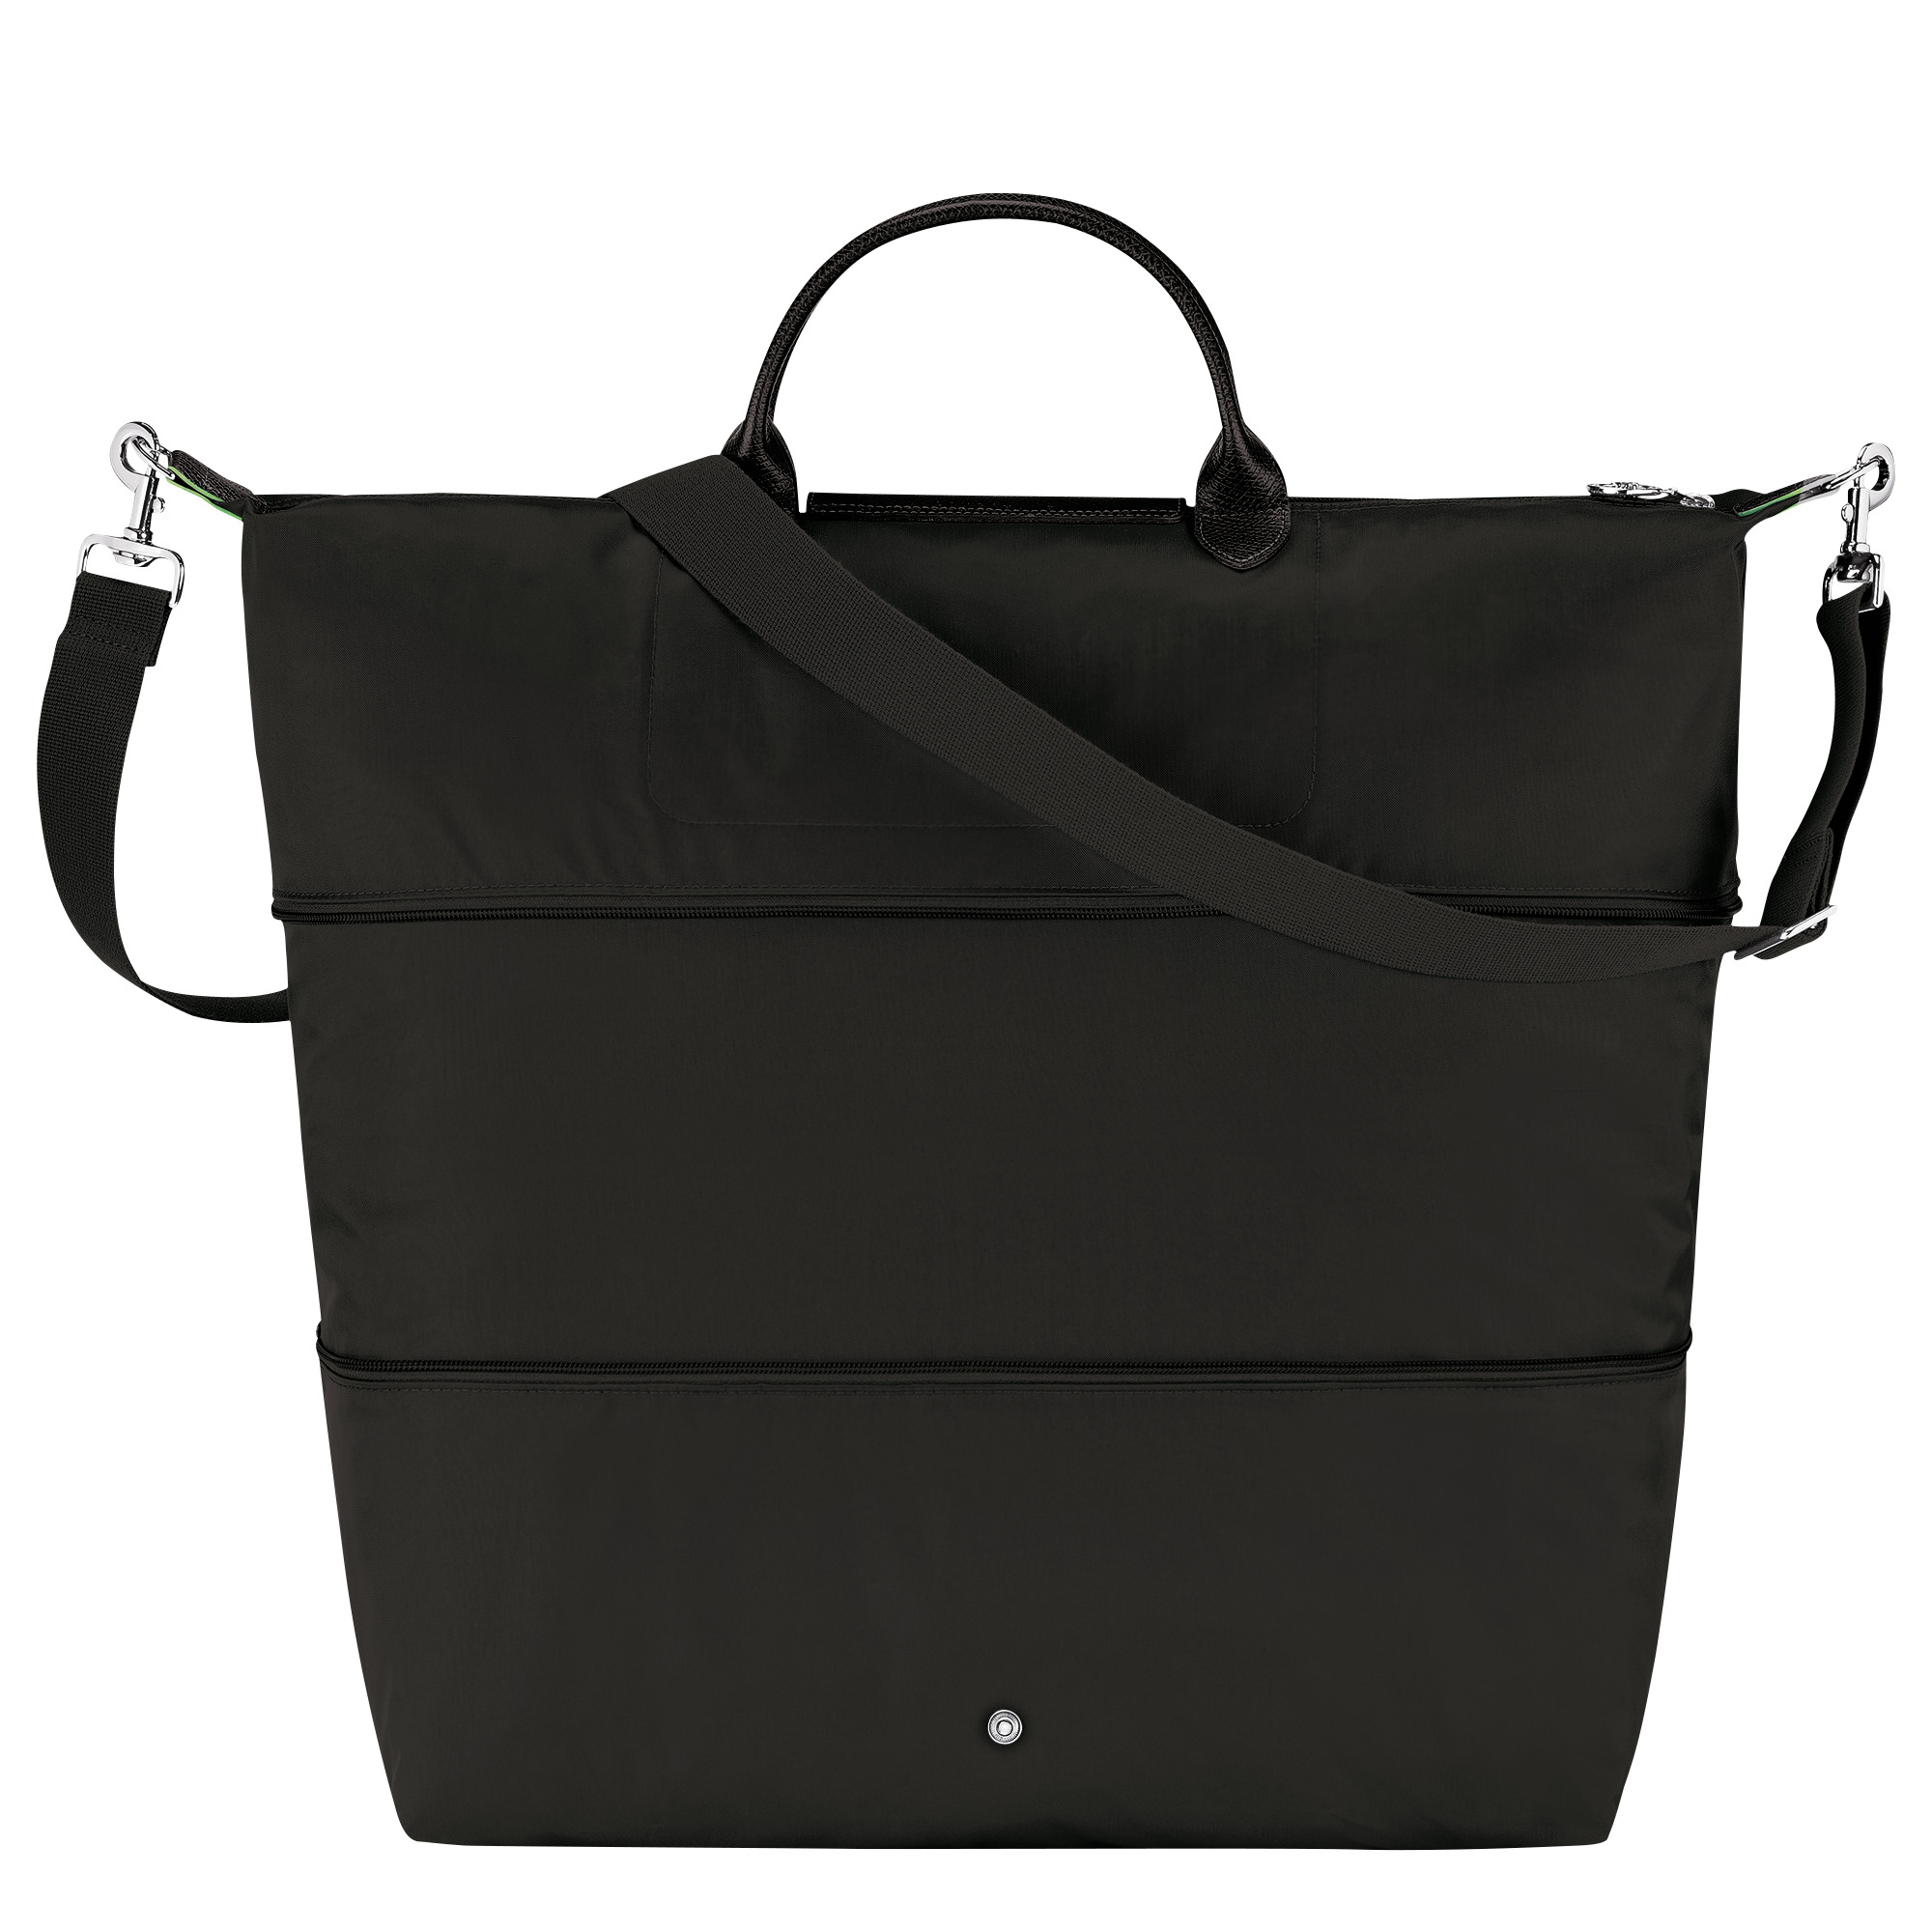 Le Pliage Green Travel bag expandable Black - Recycled canvas - 4